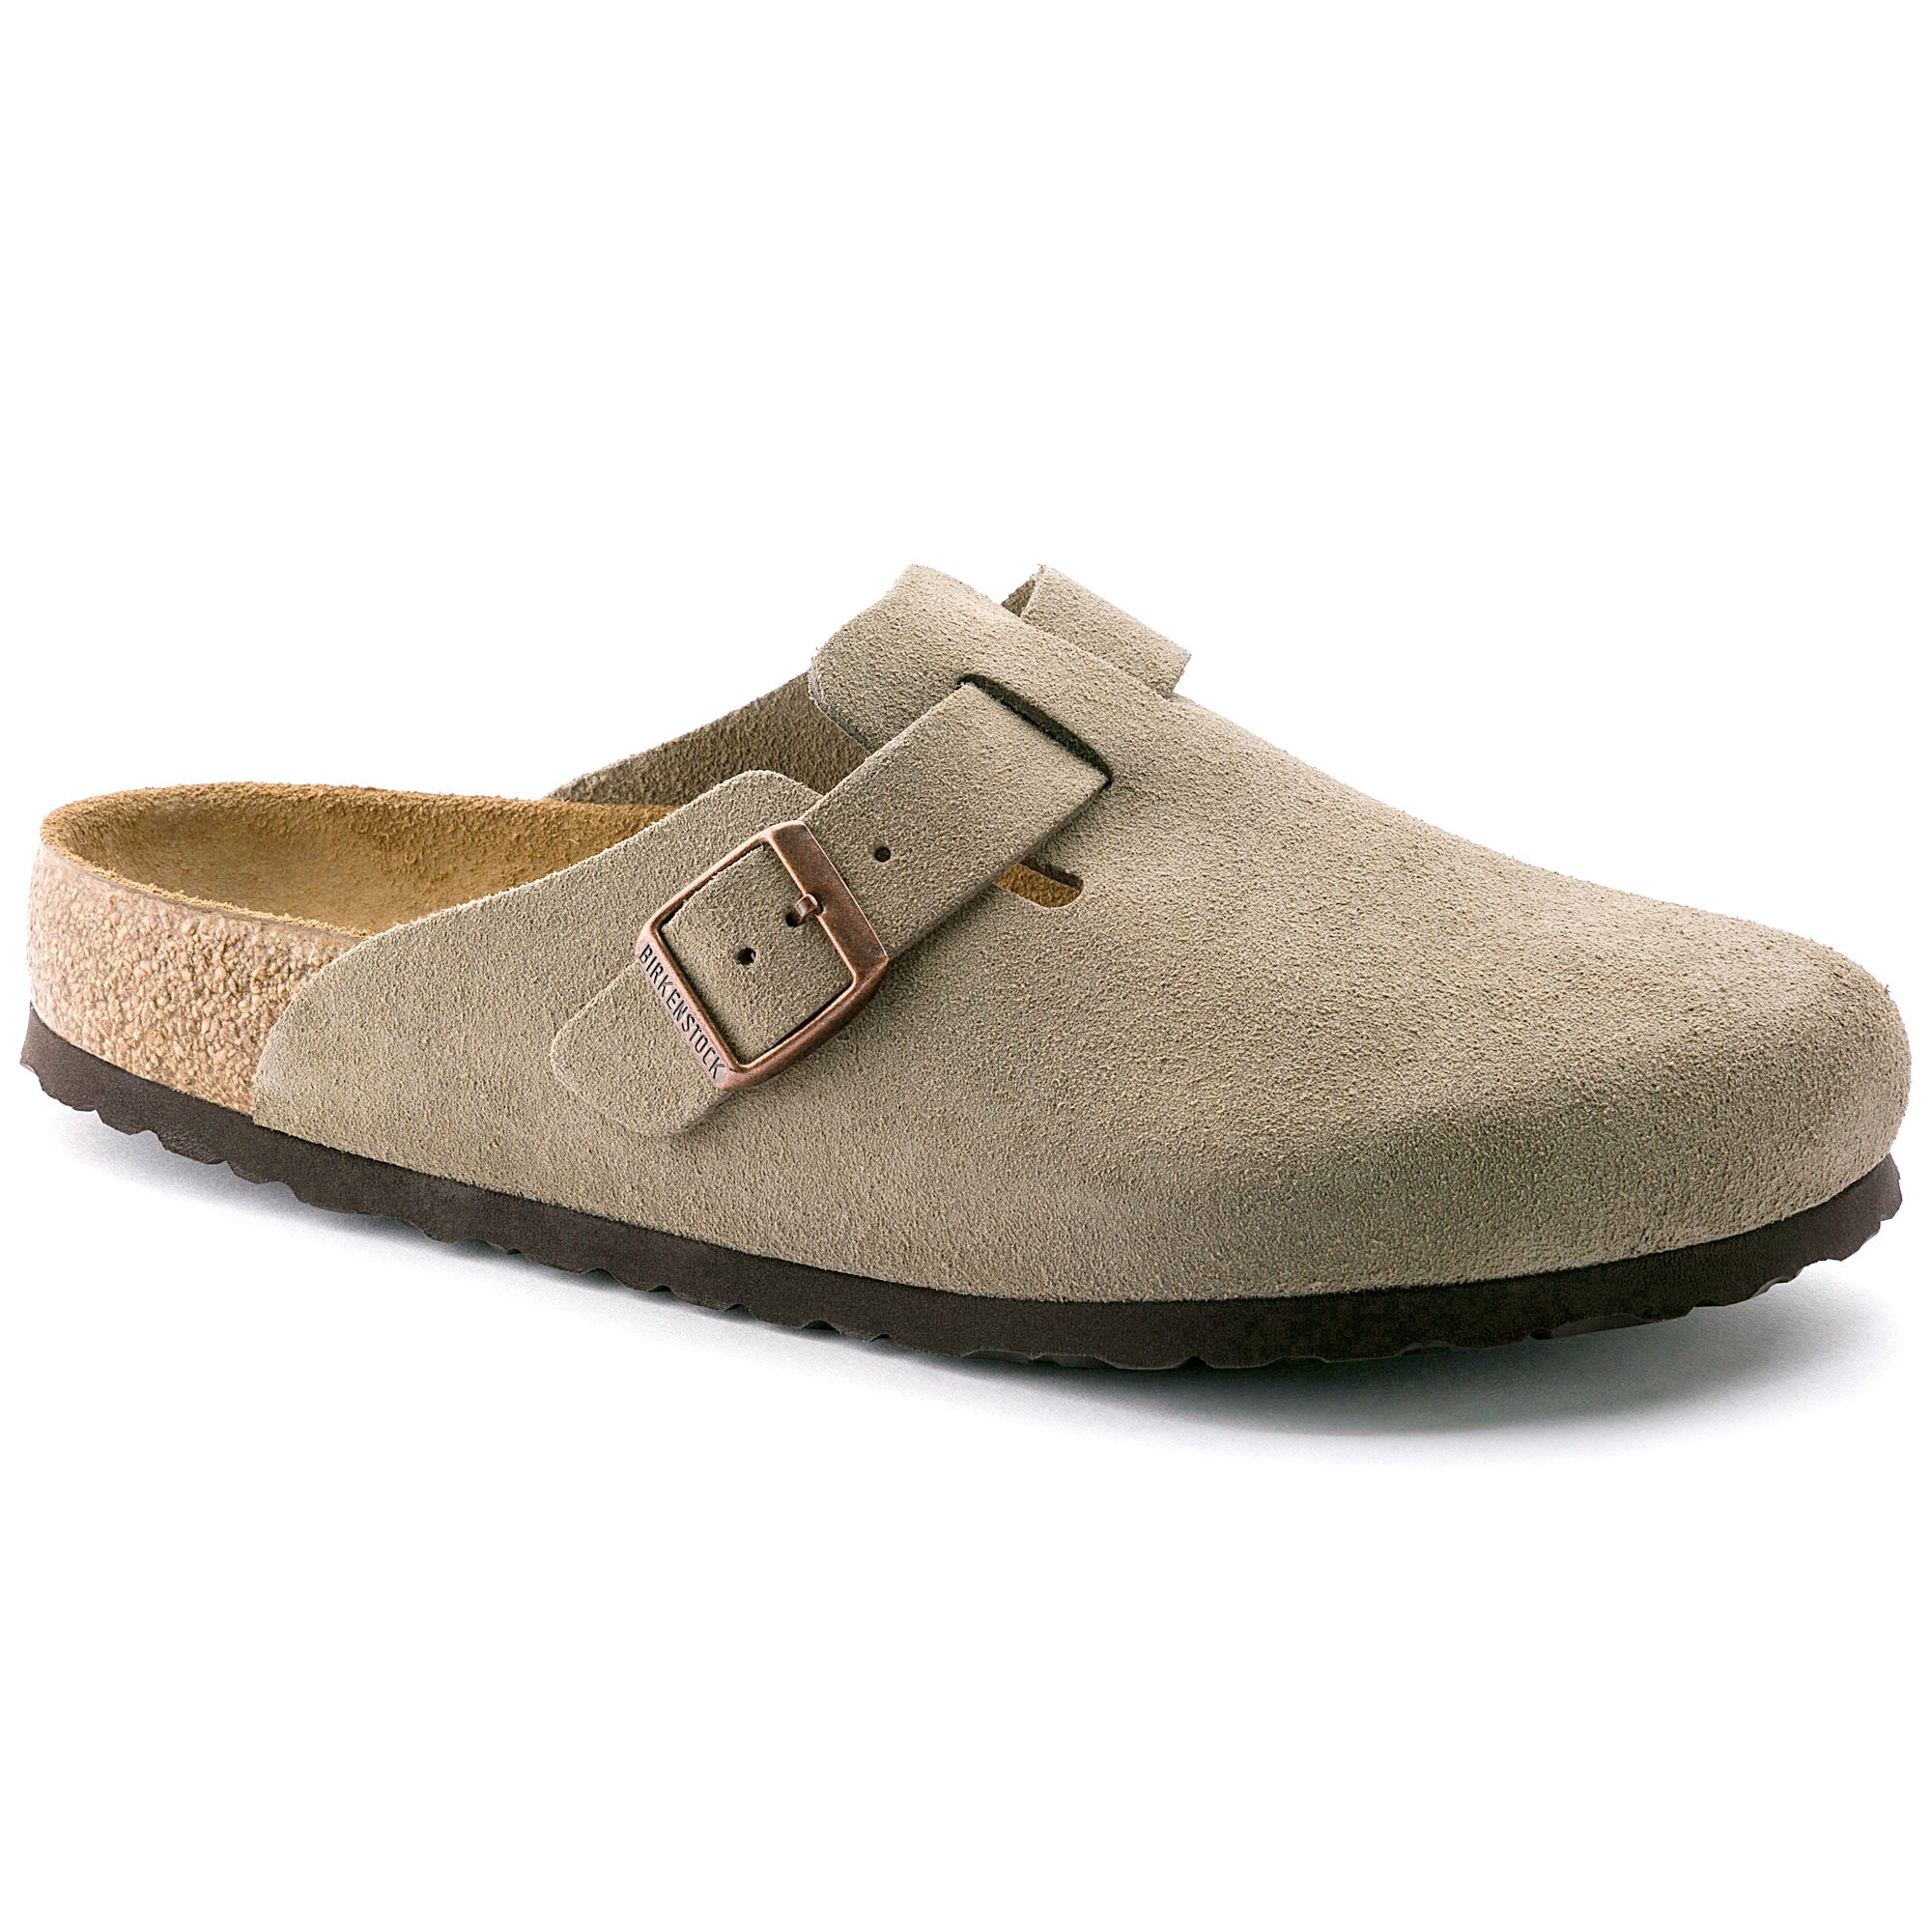 Birkenstock Boston Soft Footbed Suede Leather Color: Taupe (MEDIUM/NARROW WIDTH) 5